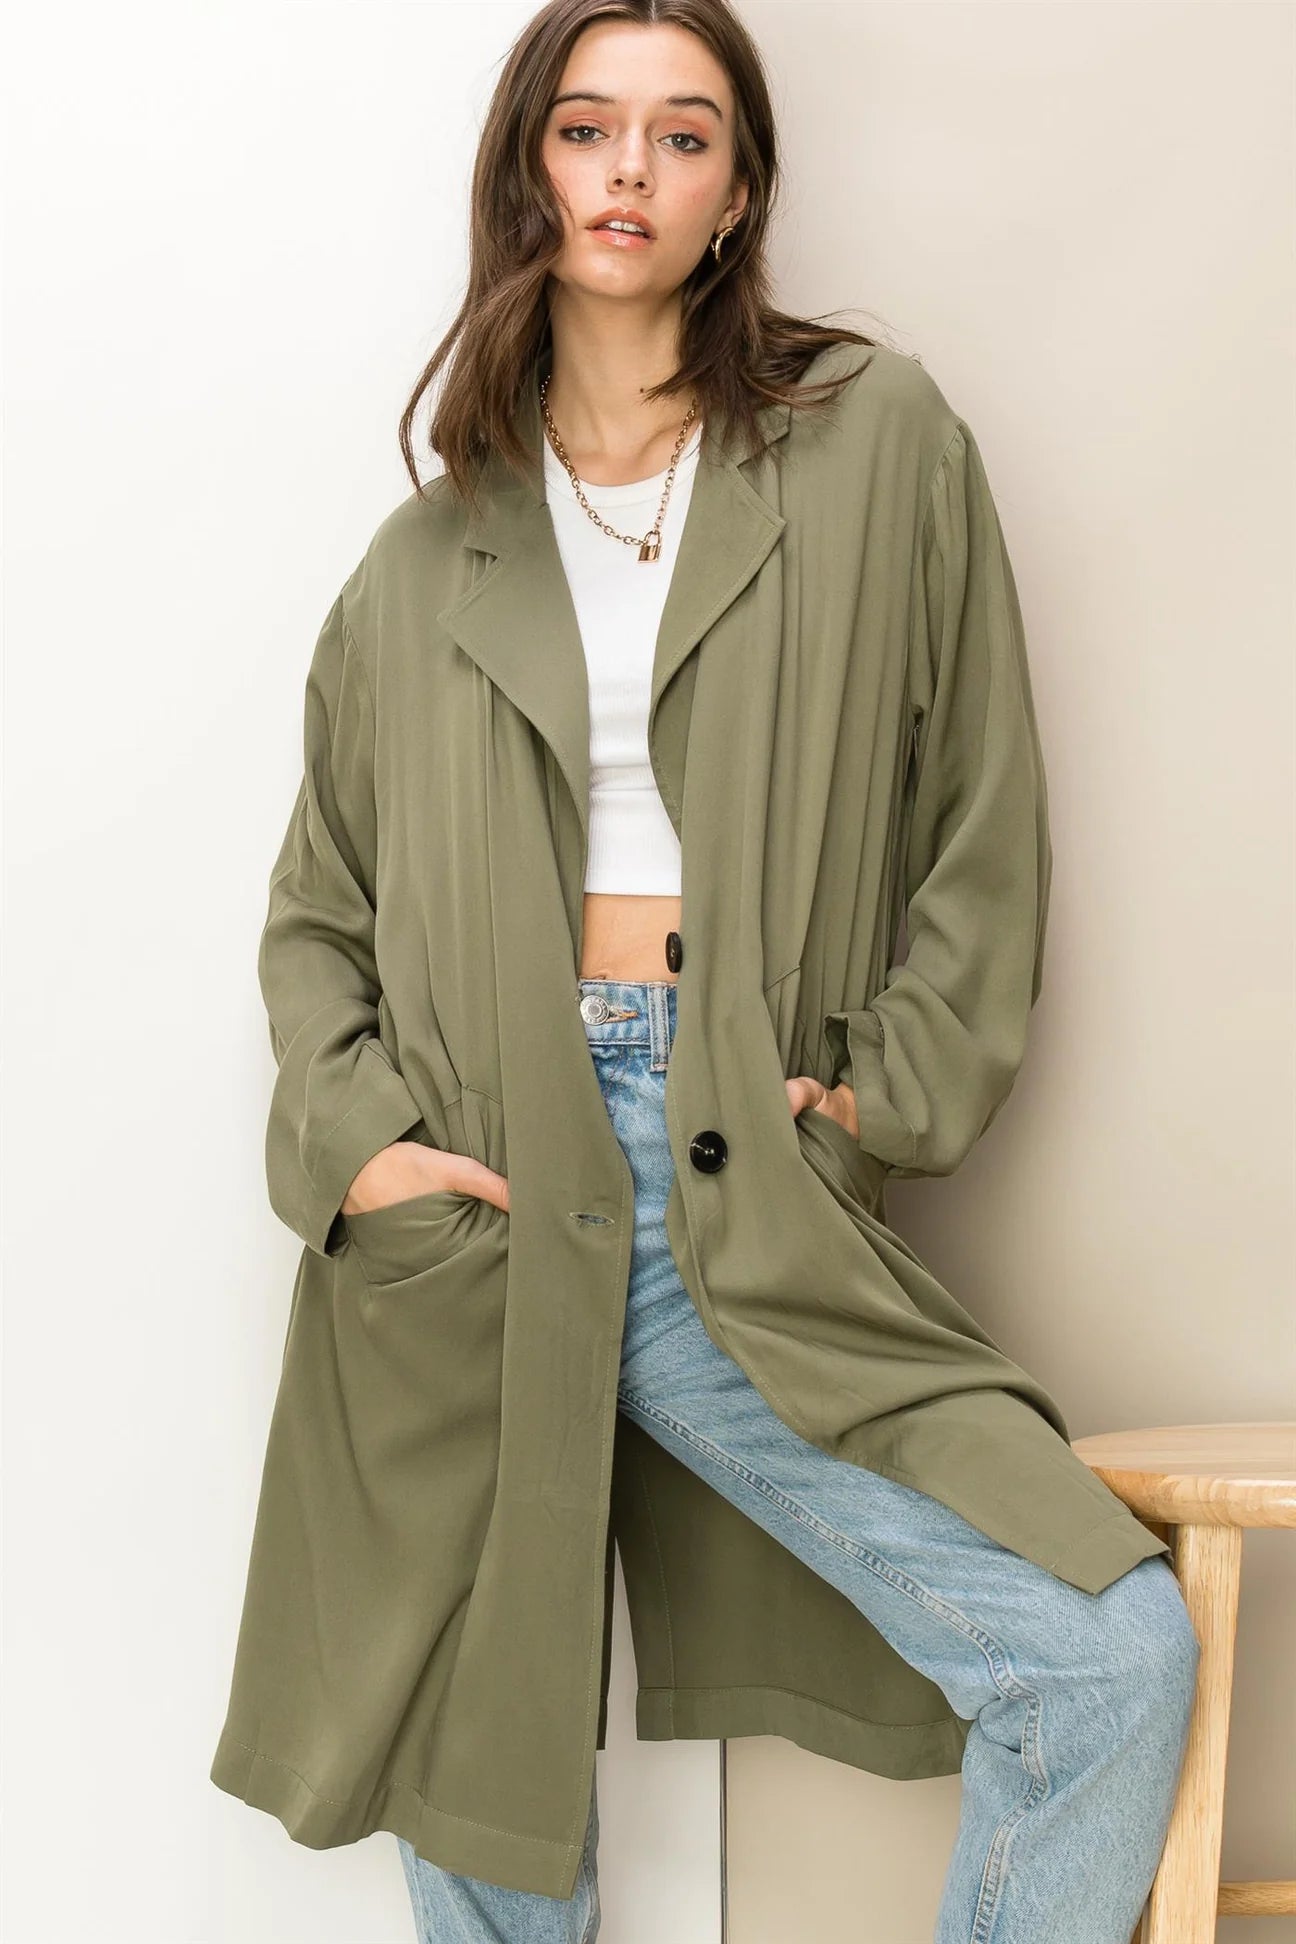 Trench Coat Oversize - 3 Colors!